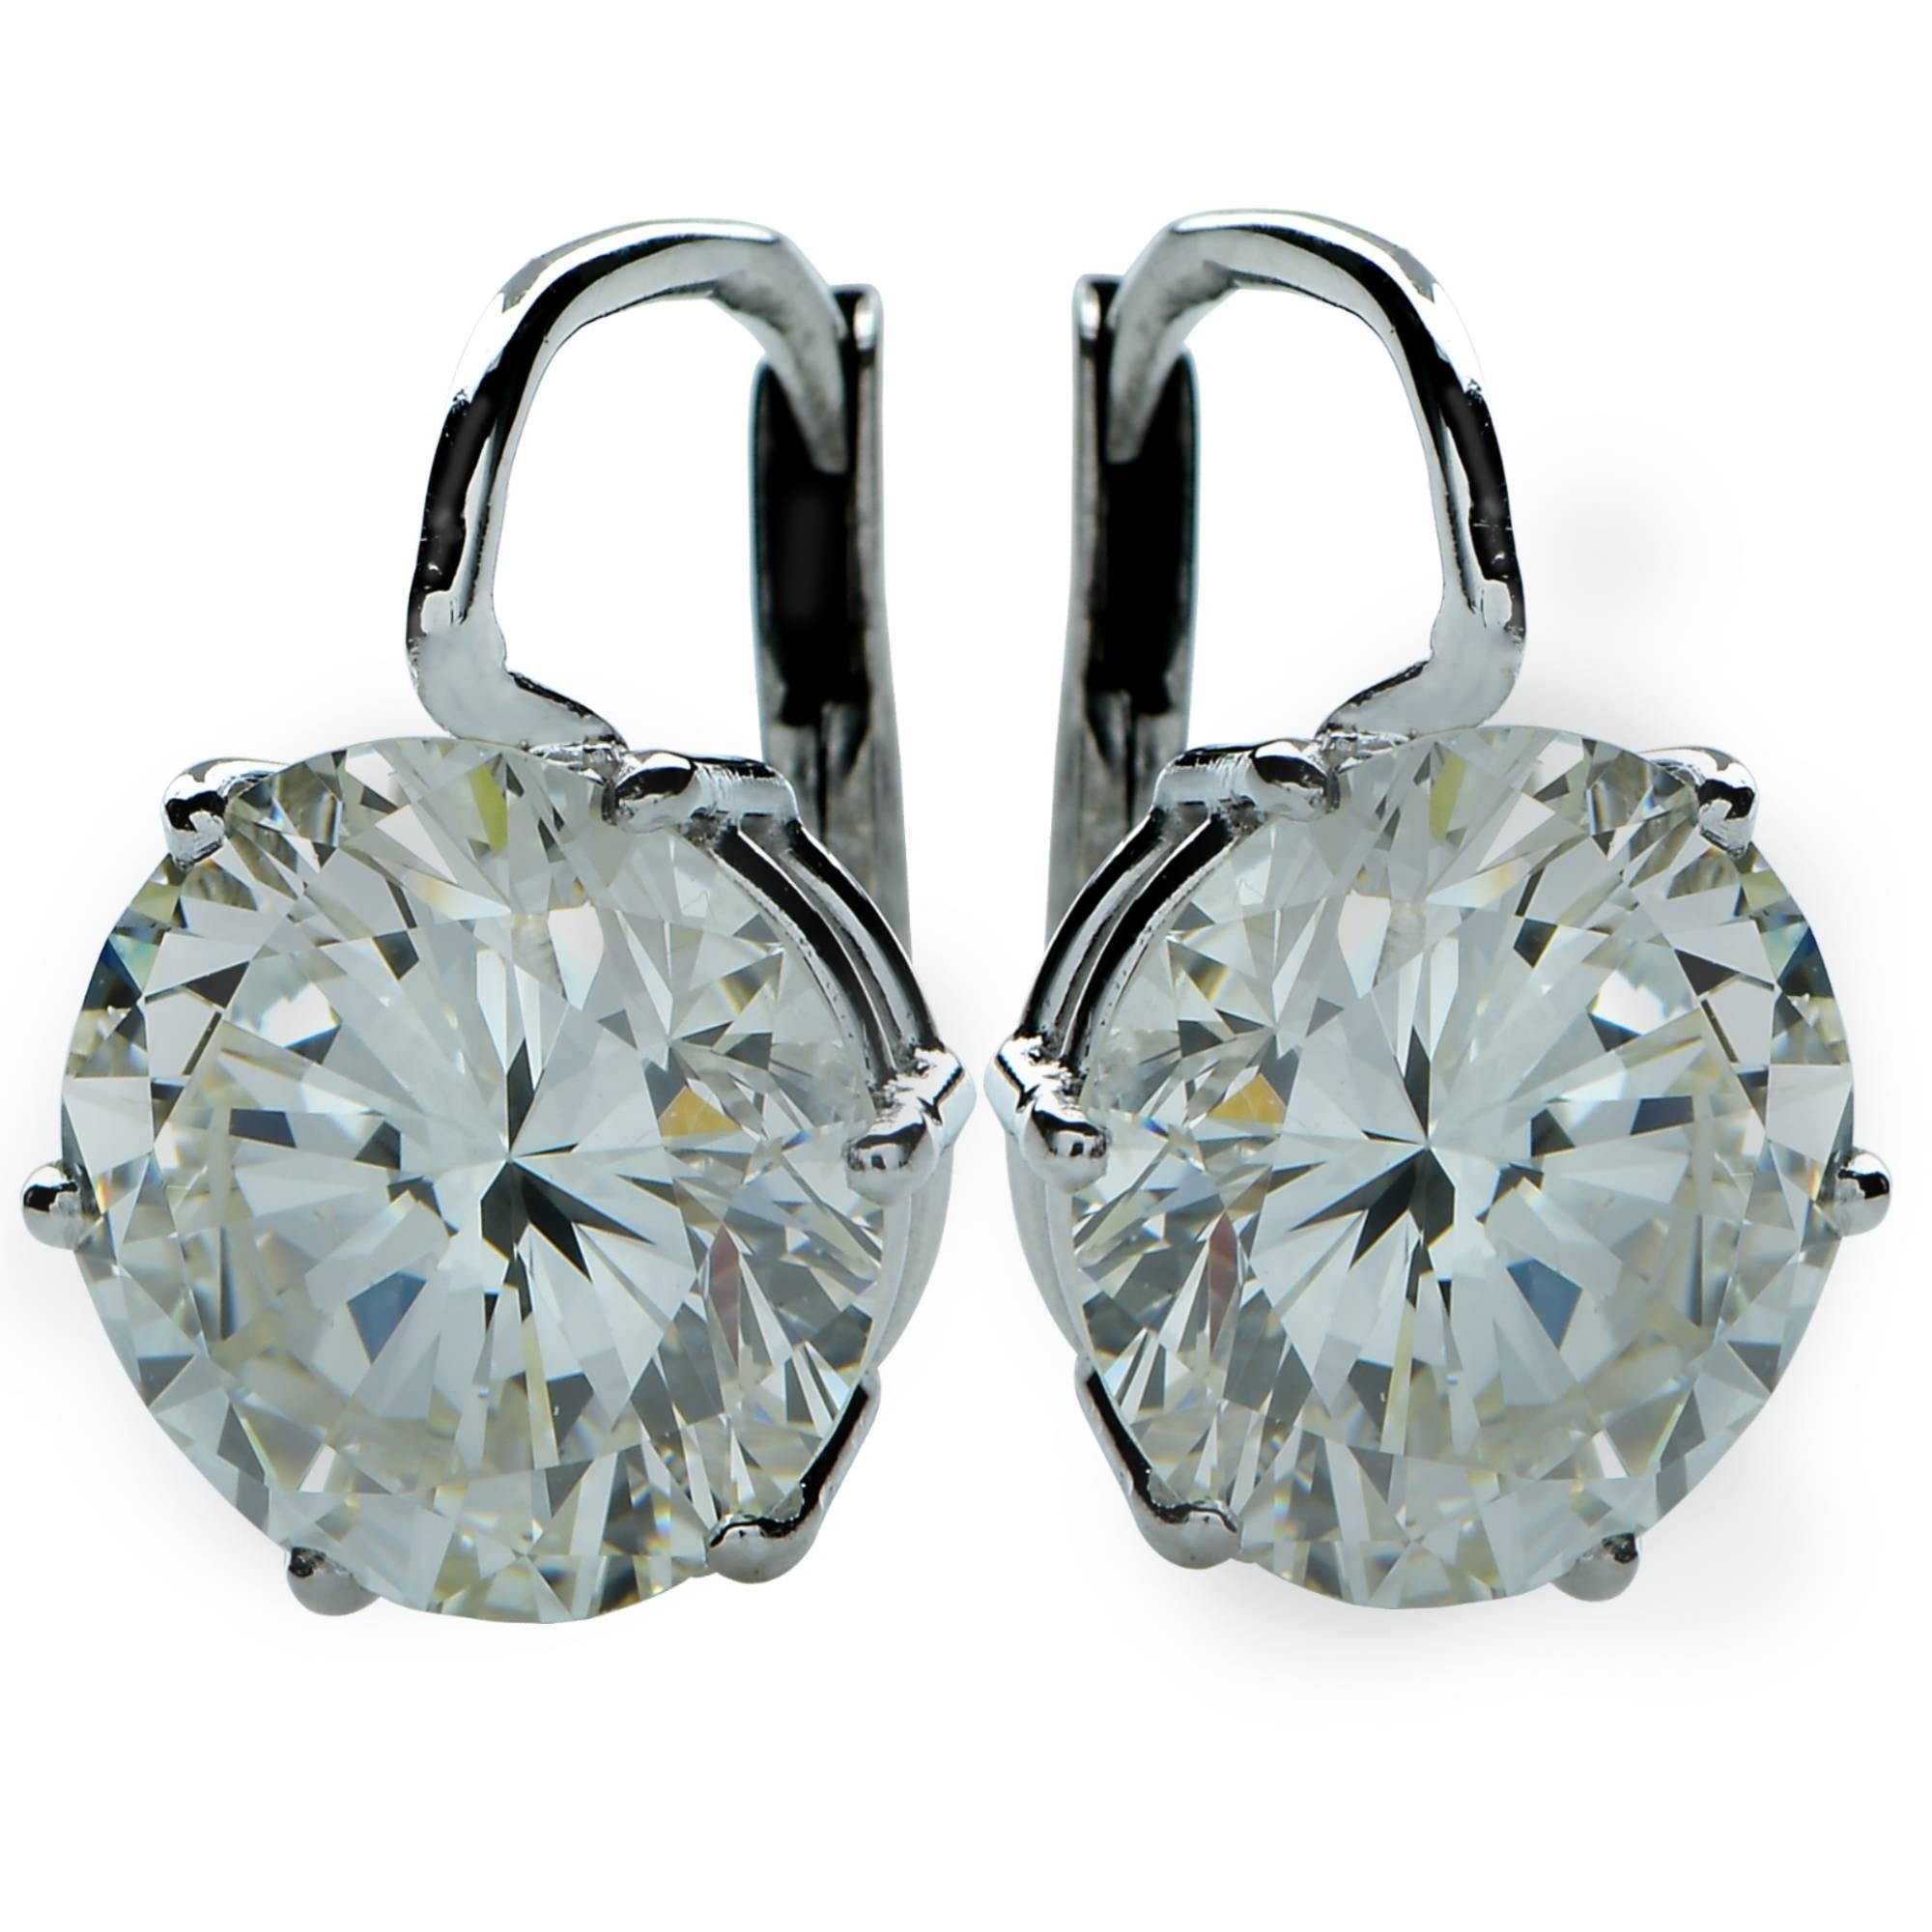 These earrings are sure to put an everlasting smile on her face. They are simple yet elegant and can be worn every day or out at a ball. Boasting 7.57cts total weight of round brilliant cut diamonds- K,M color, SI2-VVS2  clarity. They are beautiful